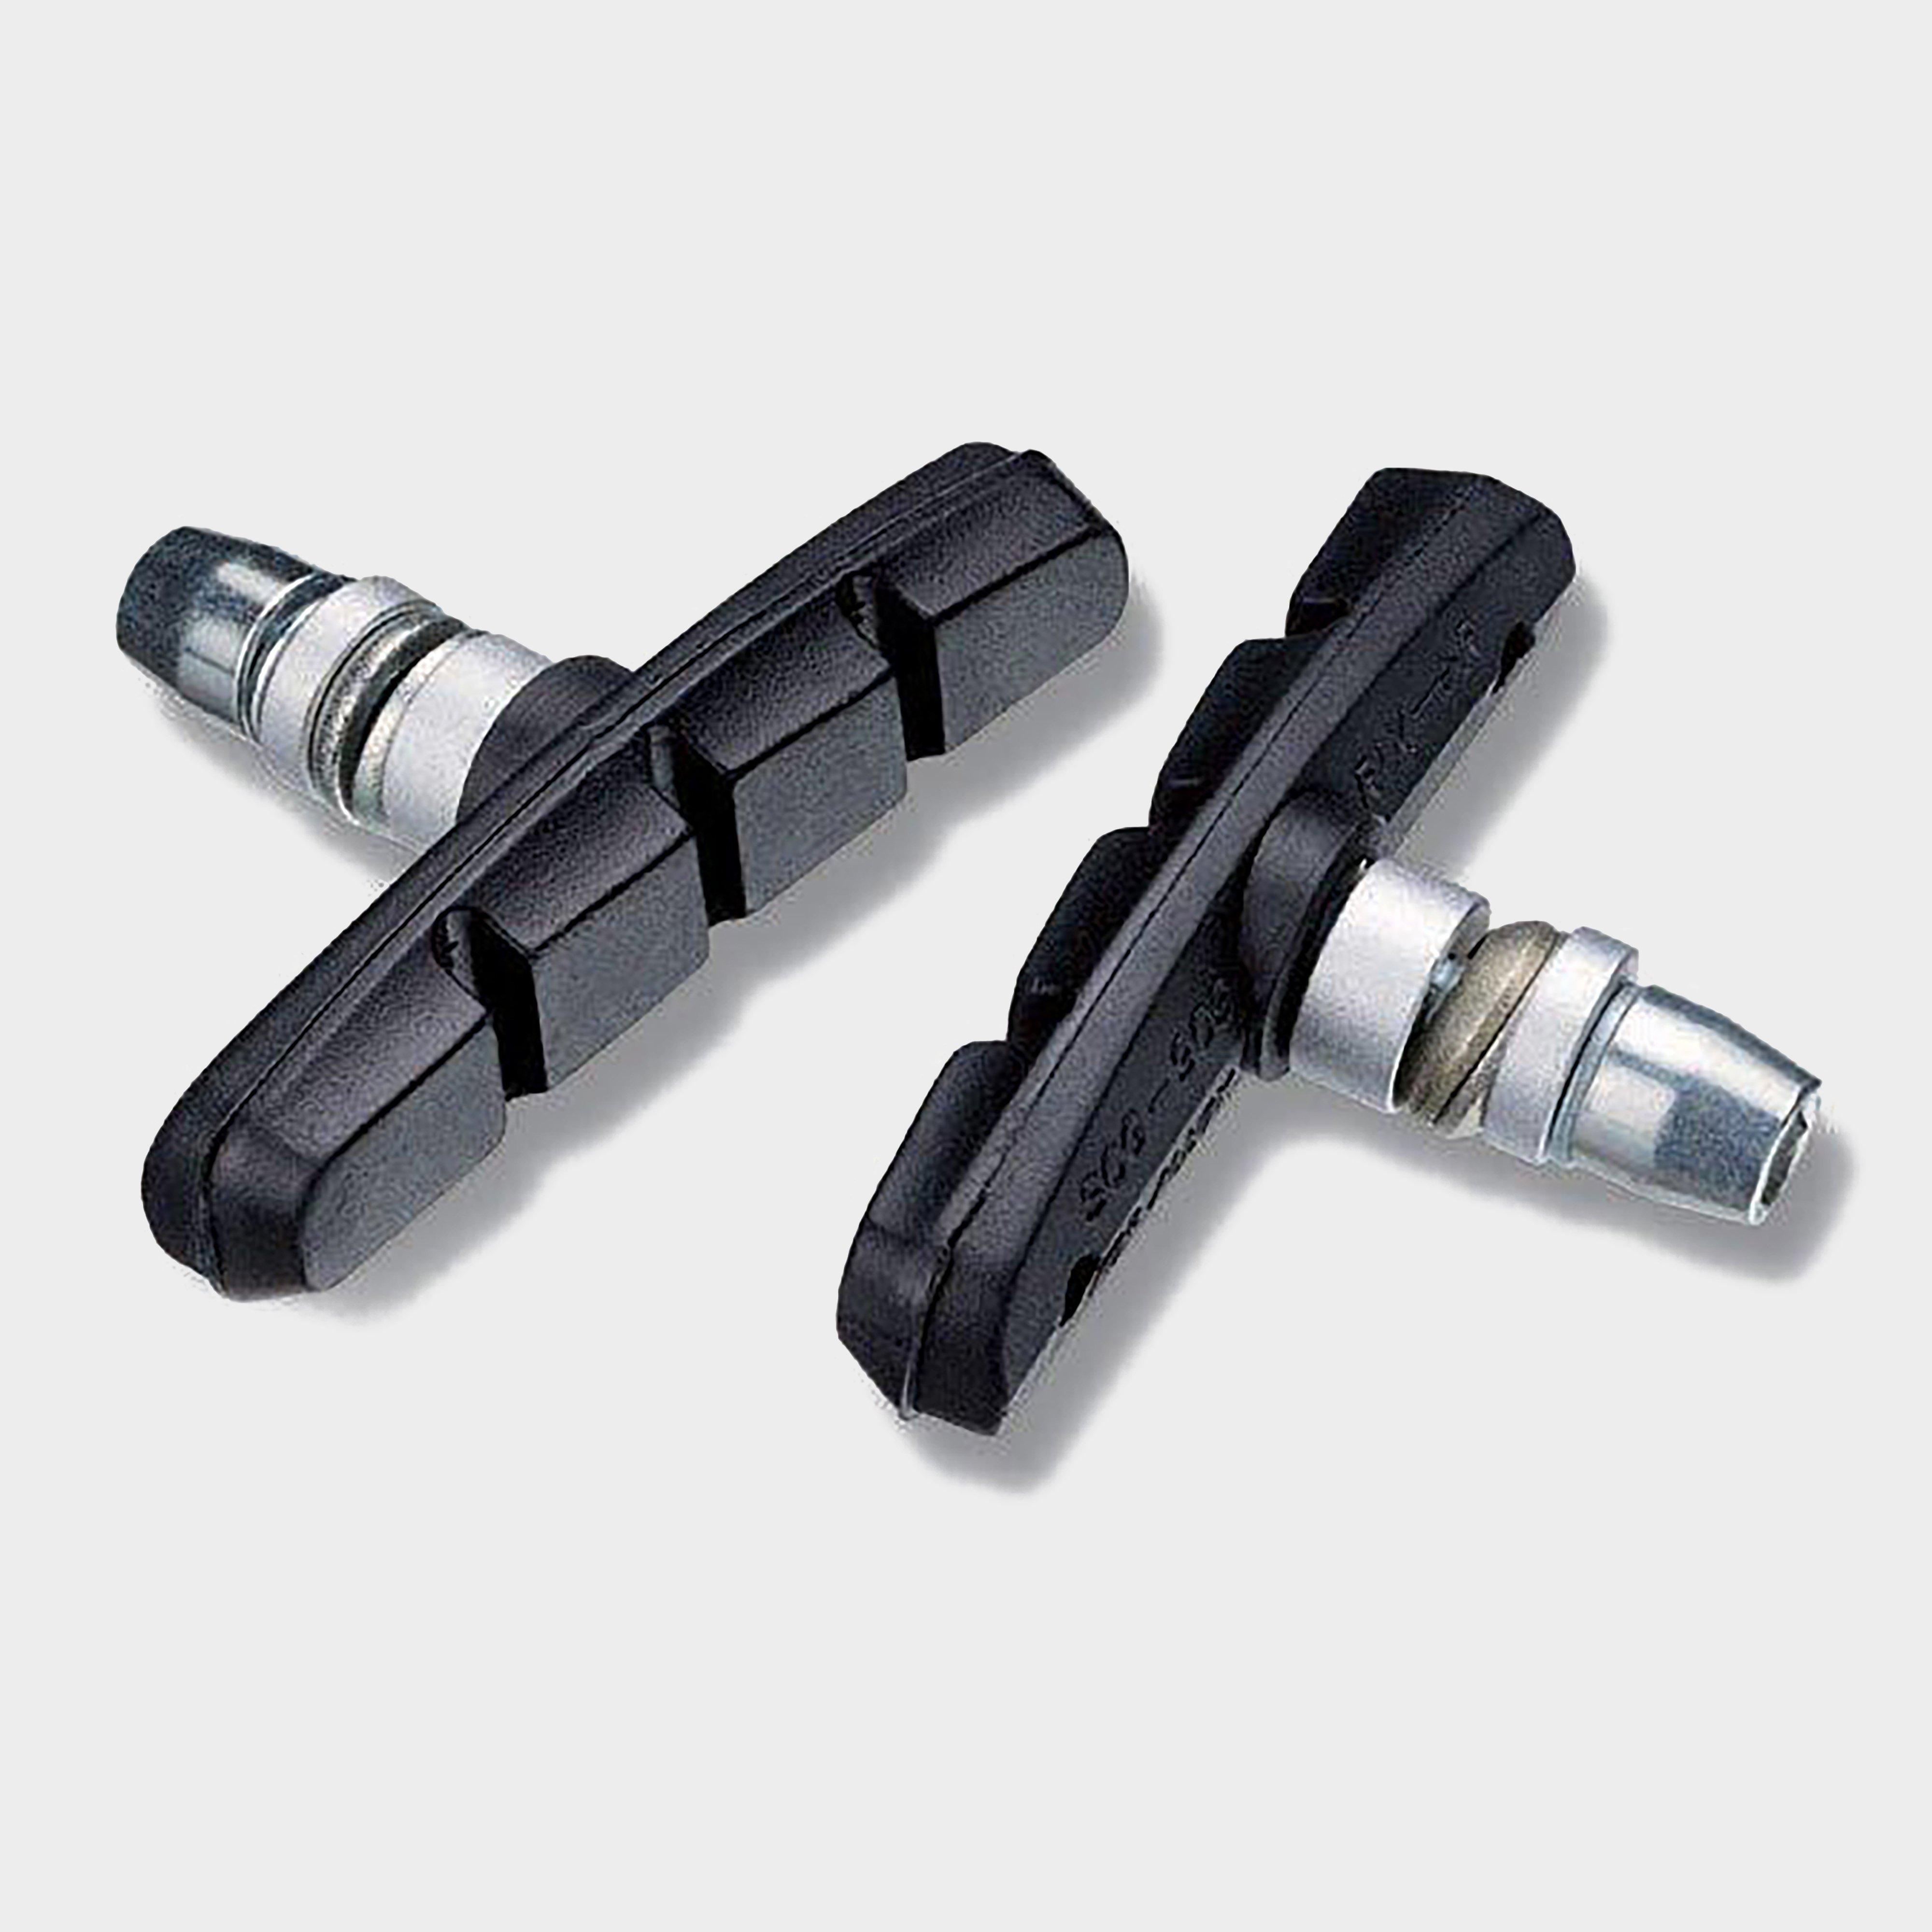 Image of Jagwire Mountain Sport Brake Pads - Blk/Blk, BLK/BLK